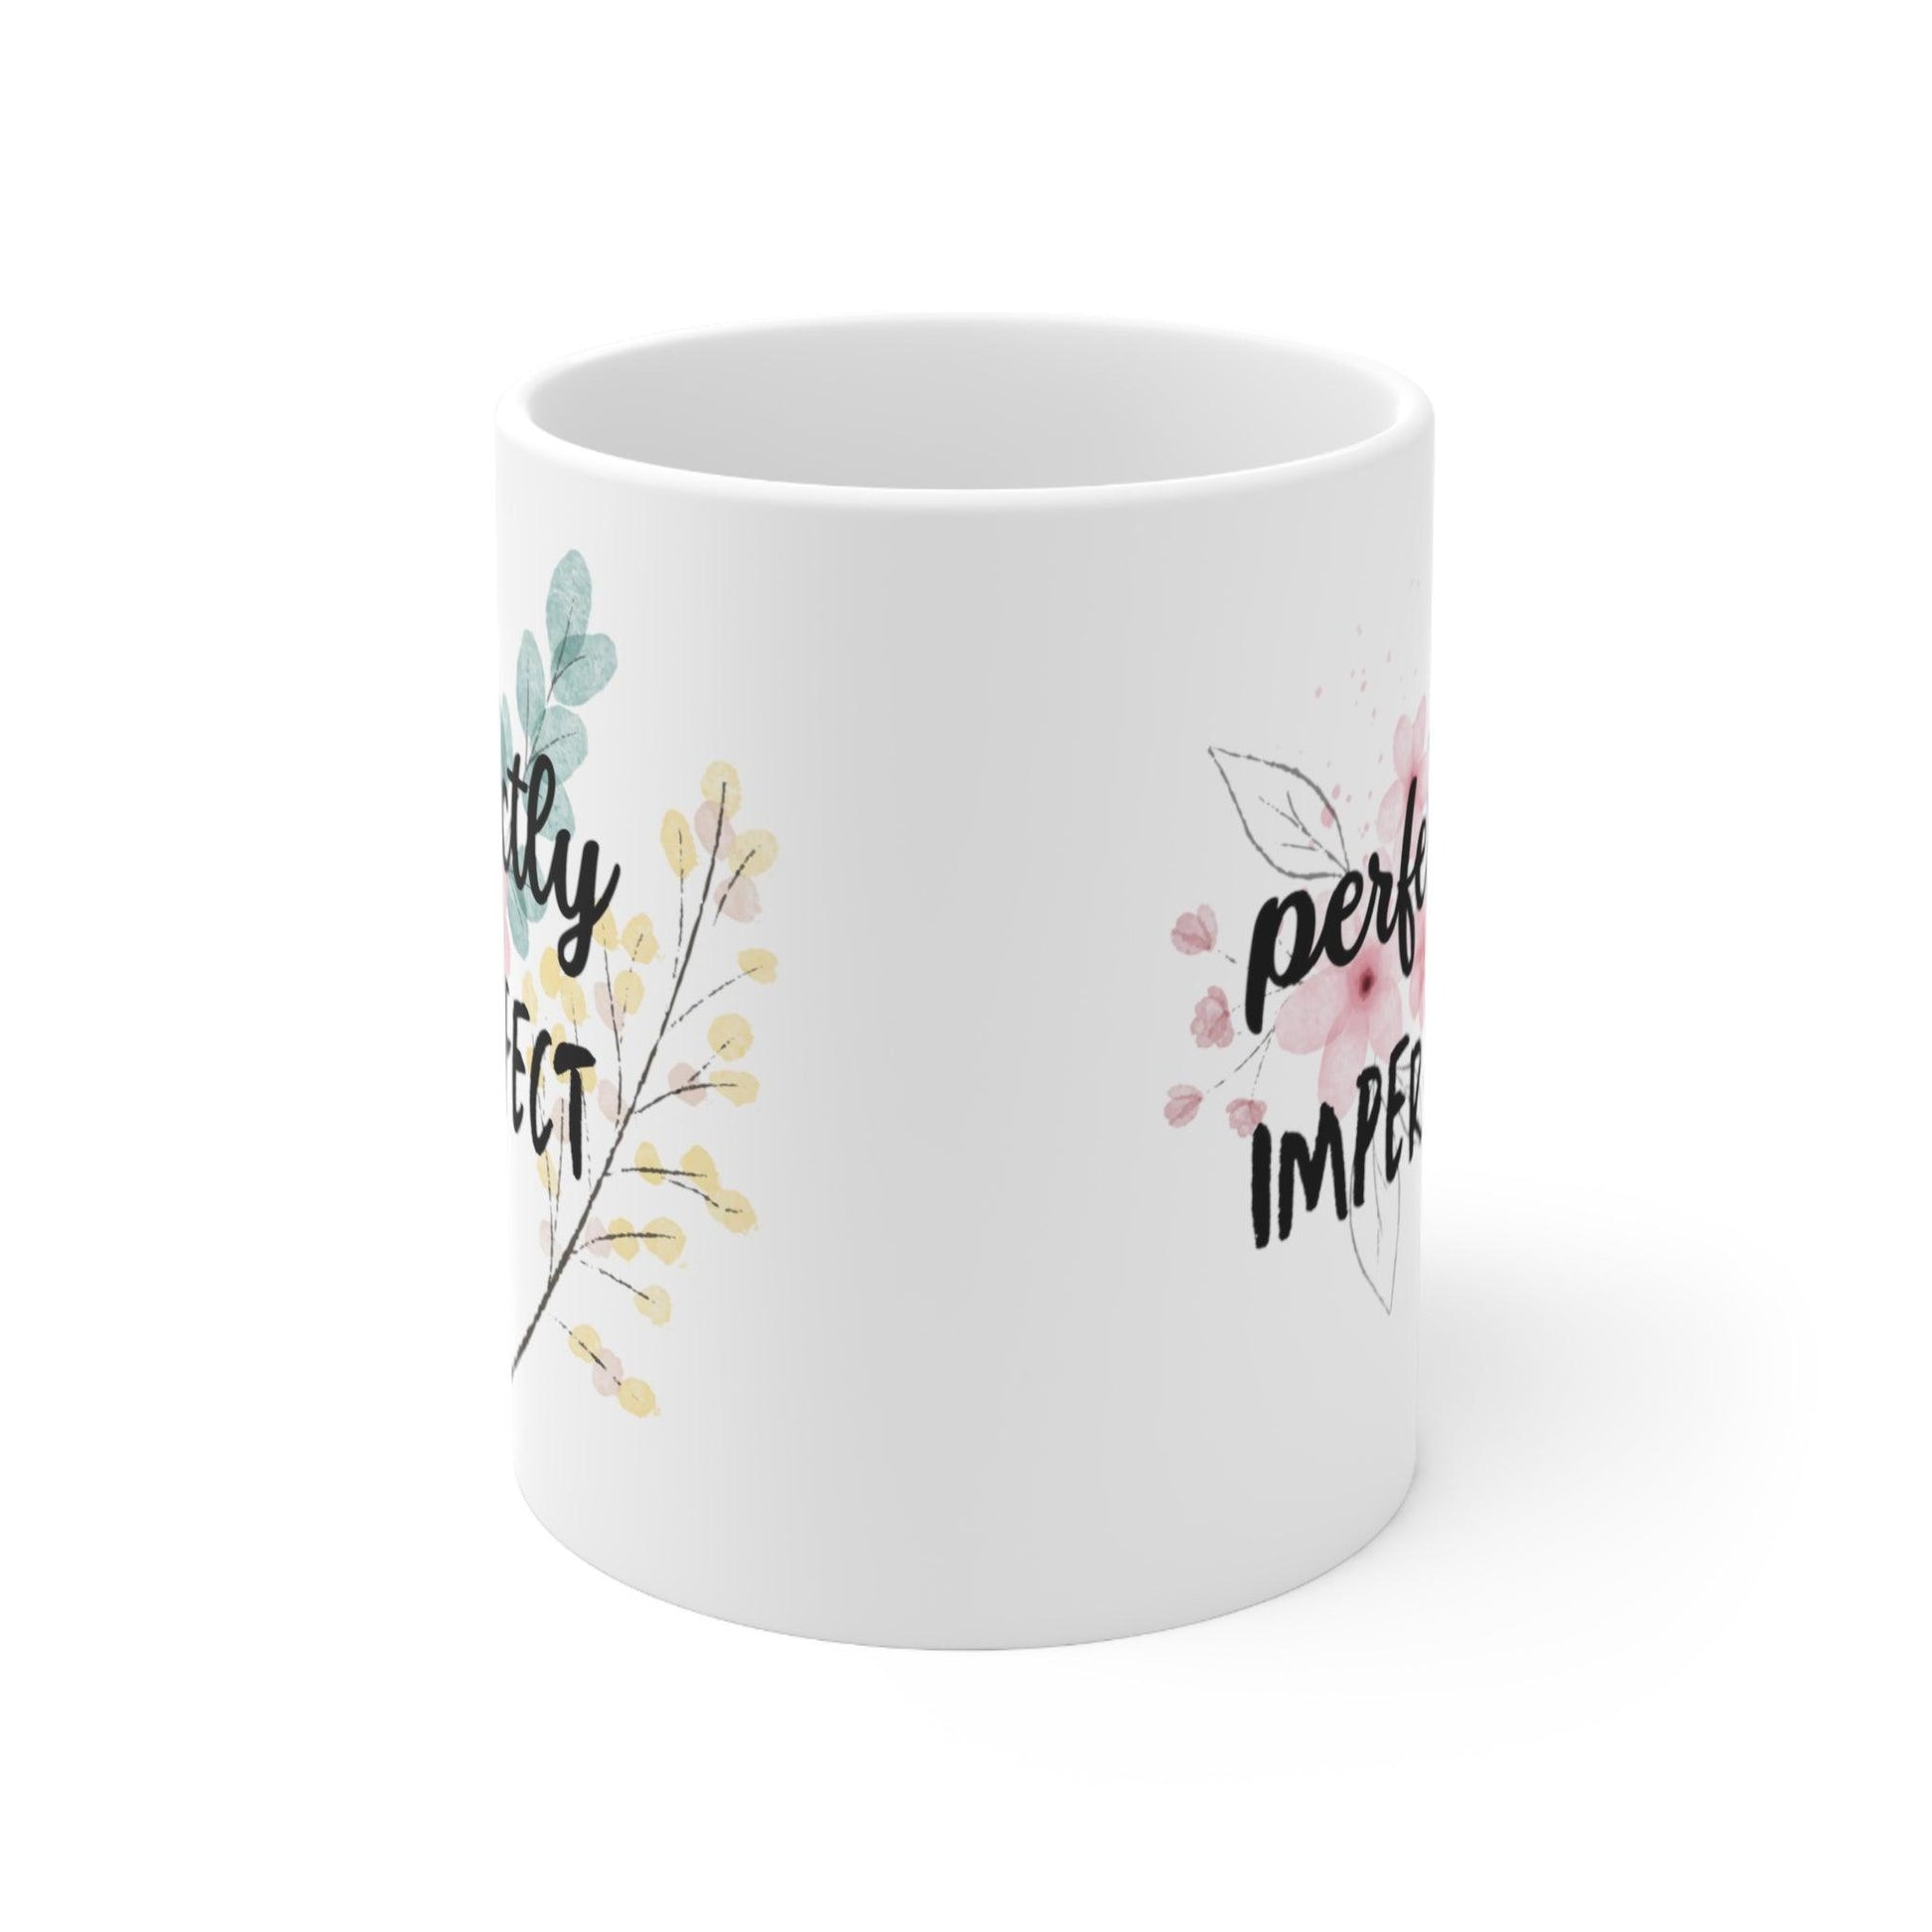 Neurodivergent Mental Health Mug - 'Perfectly Imperfect' Self Care Cup - Fidget and Focus